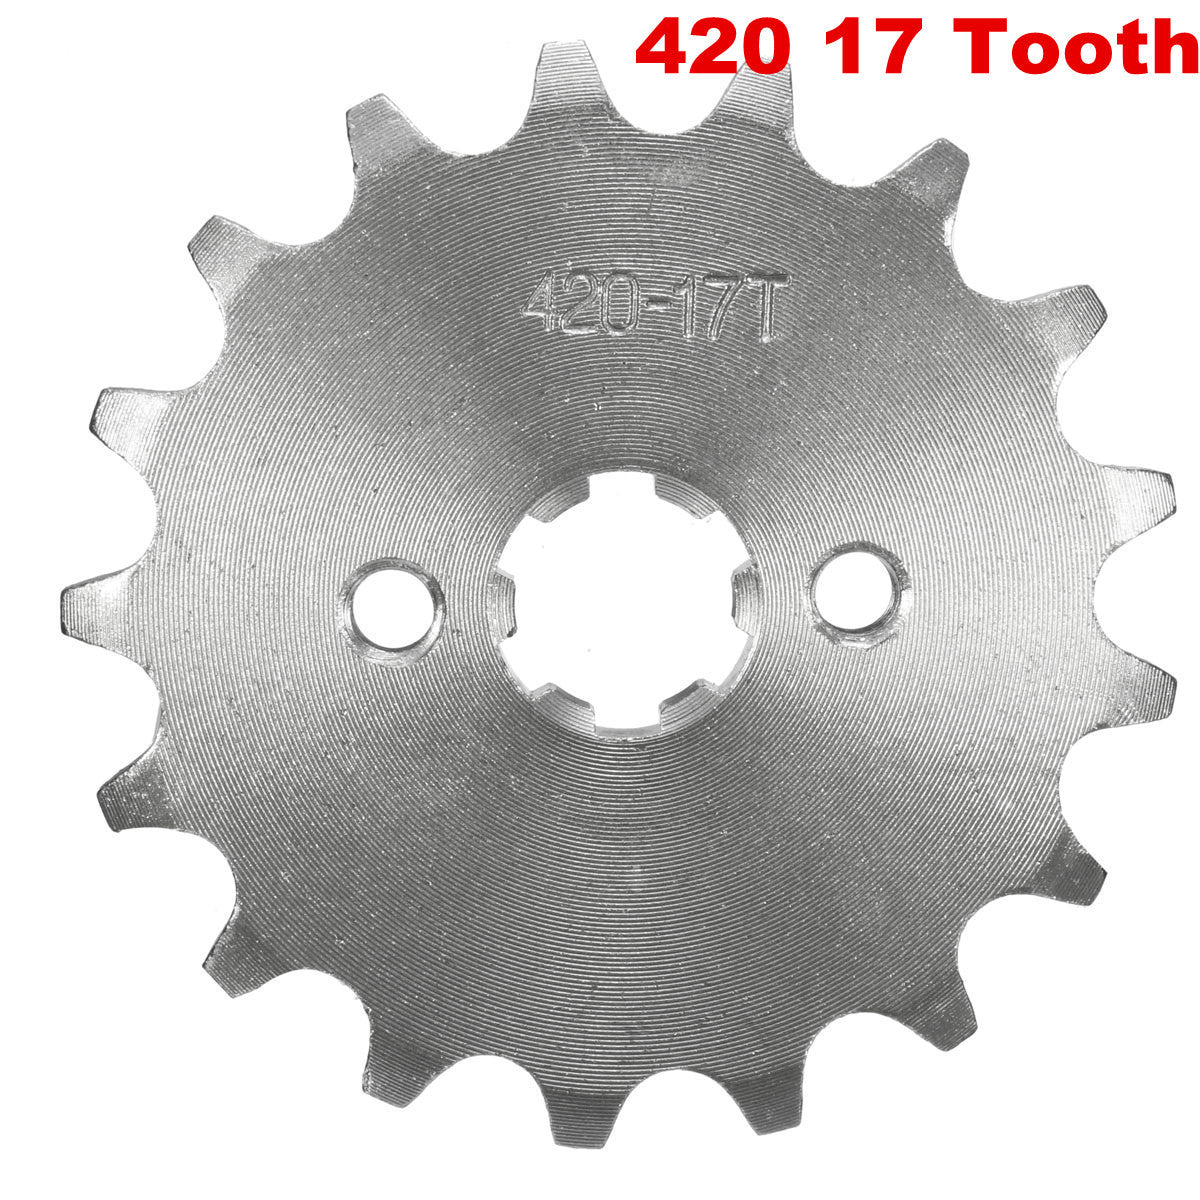 Slate Gray 420 10/11/12/13/14/15/16/17/18/19 Tooth Front Counter Sprocket 17mm Shaft For 70cc 110cc 125cc Motorcycle Pit Dirt Bike ATV